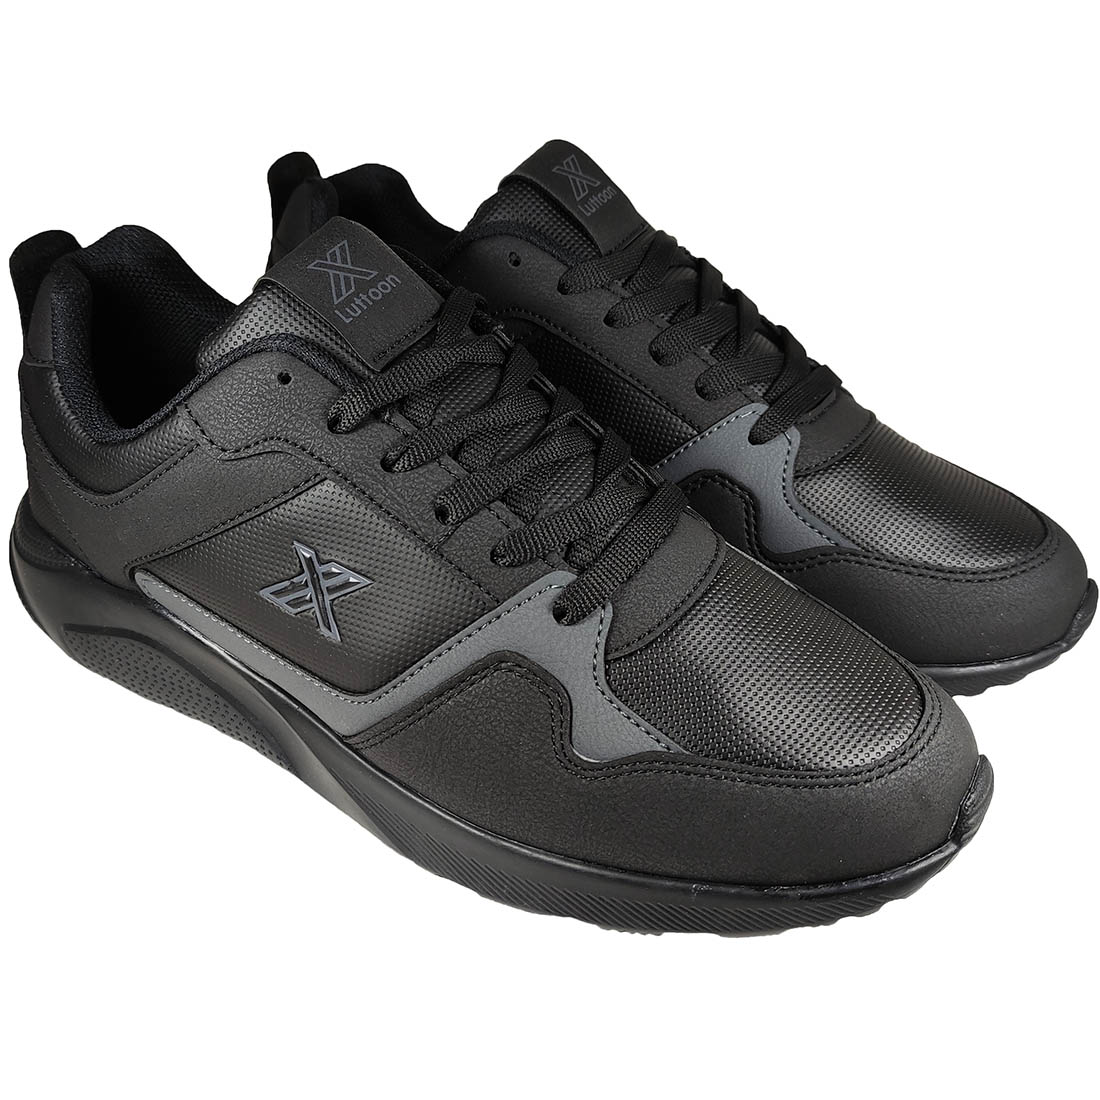 Sports Shoes Luttoon 4134 Black